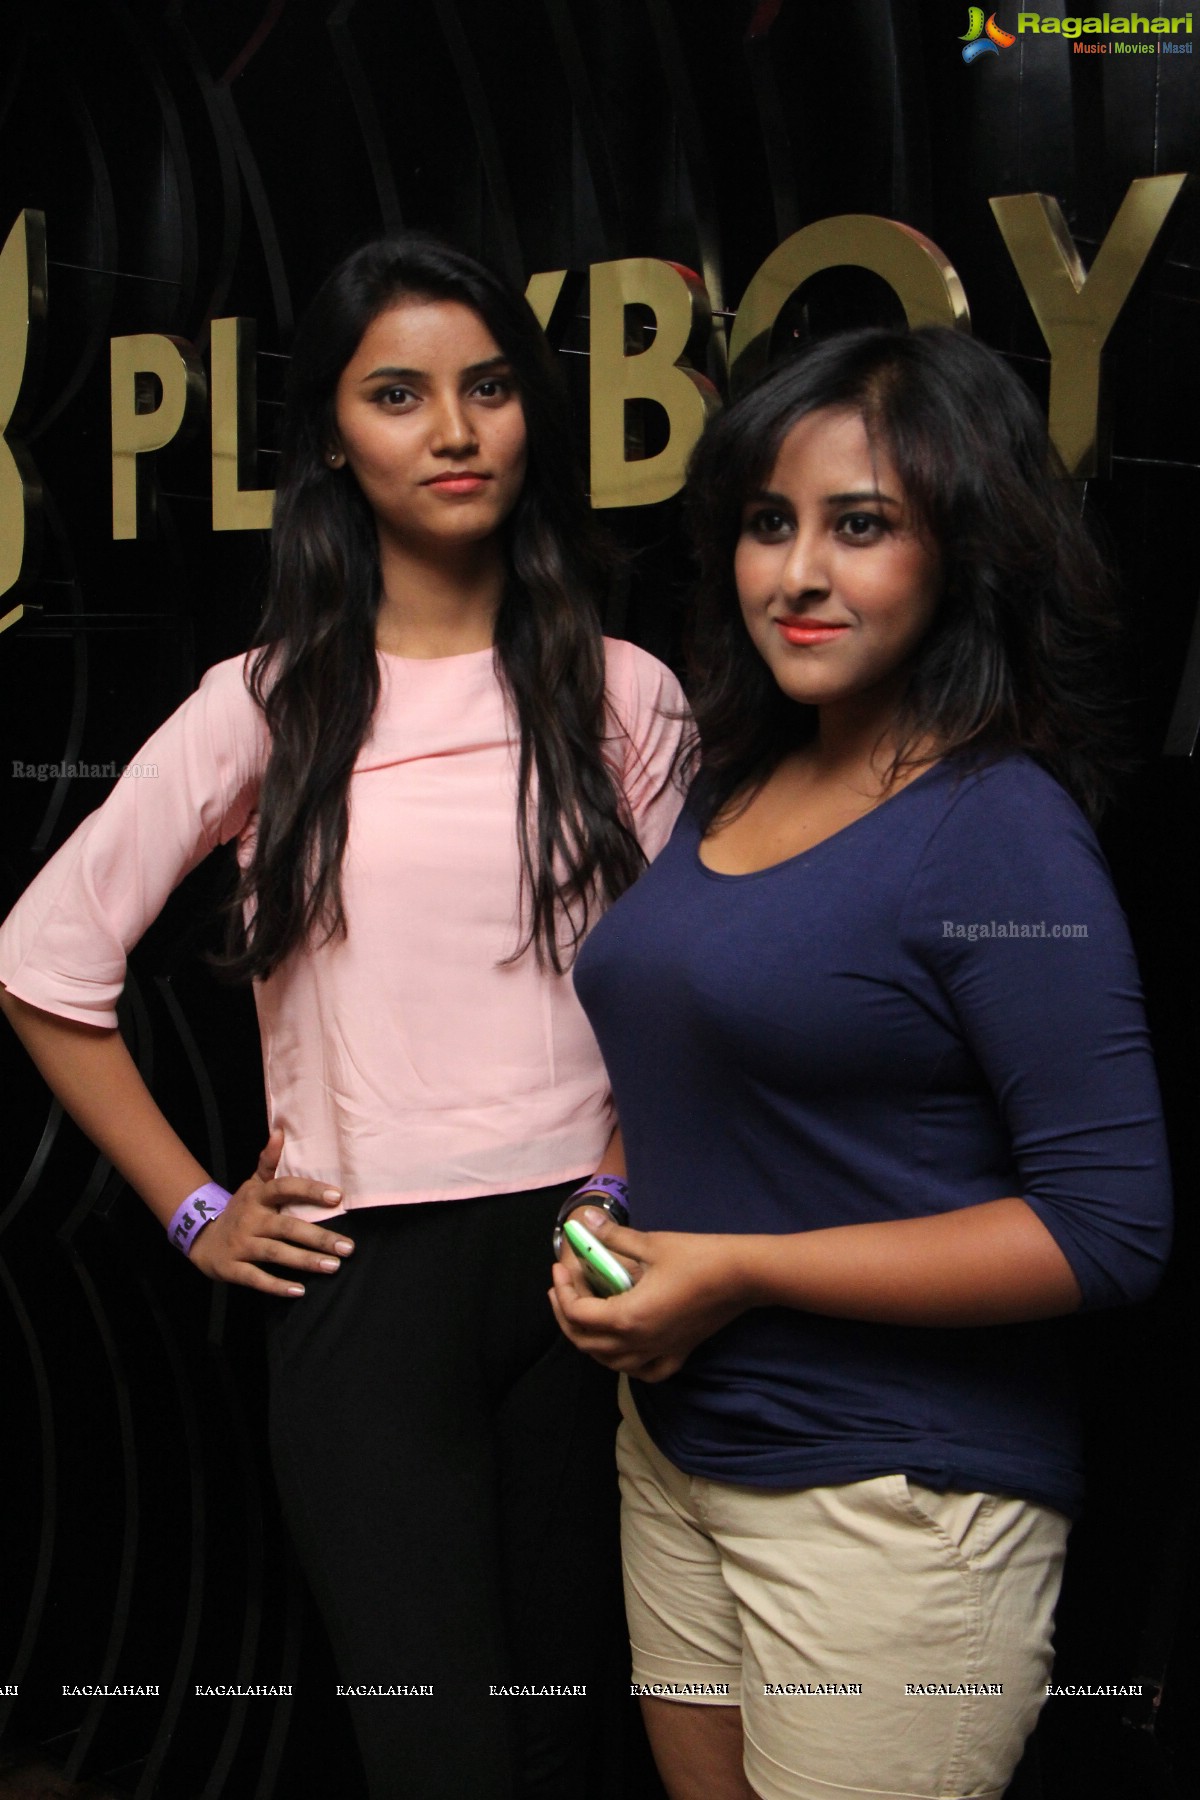 Red Bull Night Out Featuring Nawed Khan at Playboy Club Hyderabad